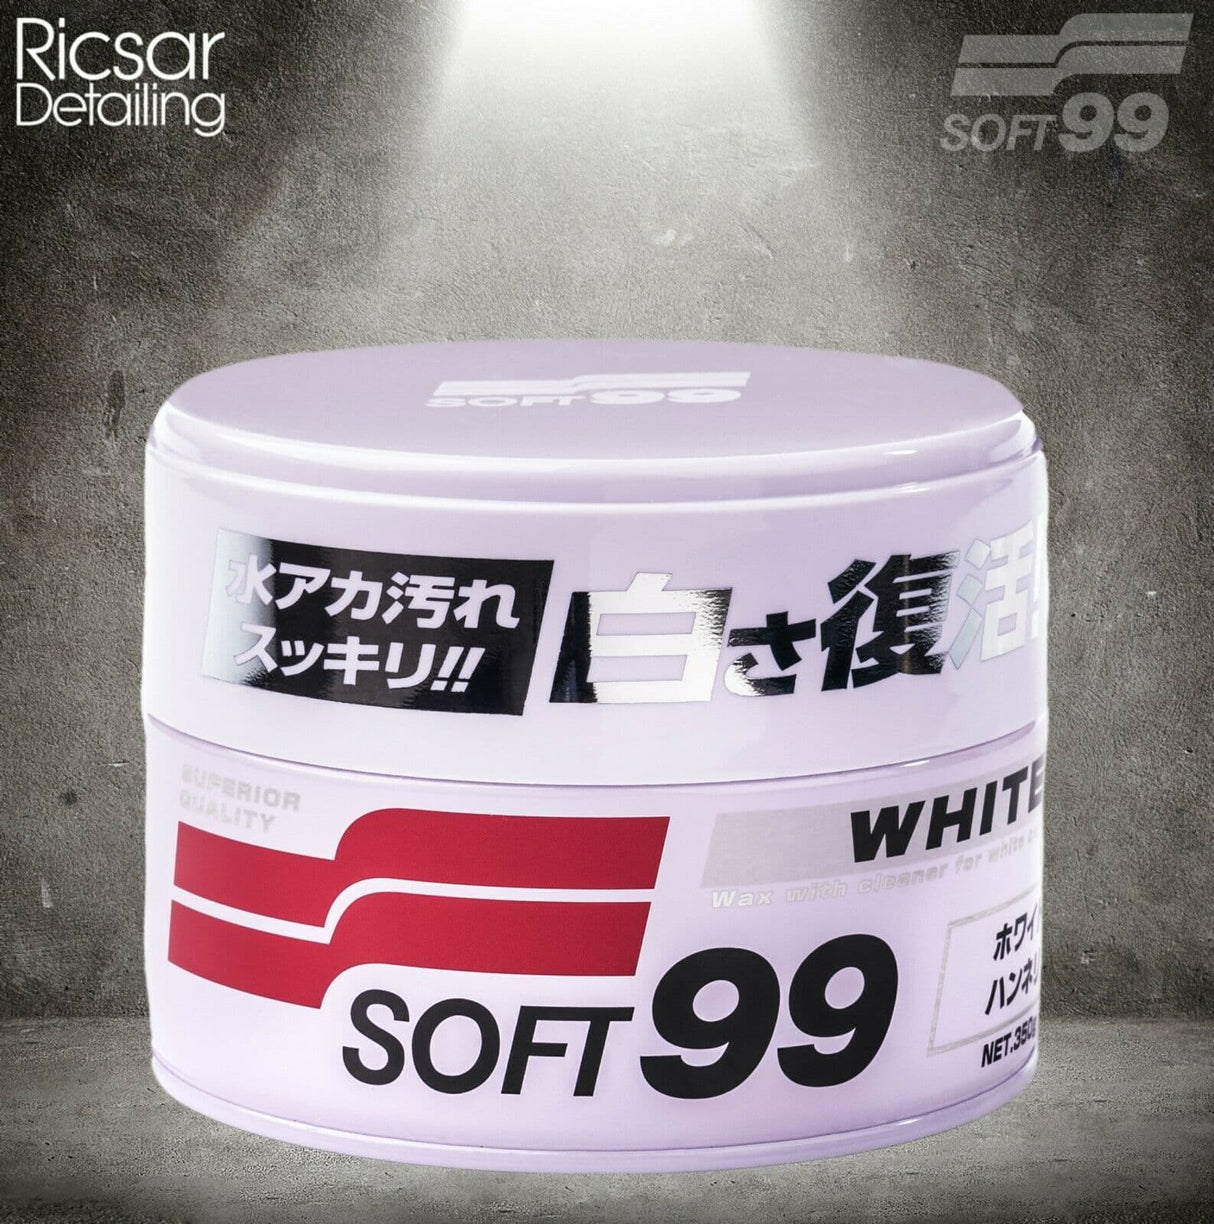 Soft99 White and Soft Wax